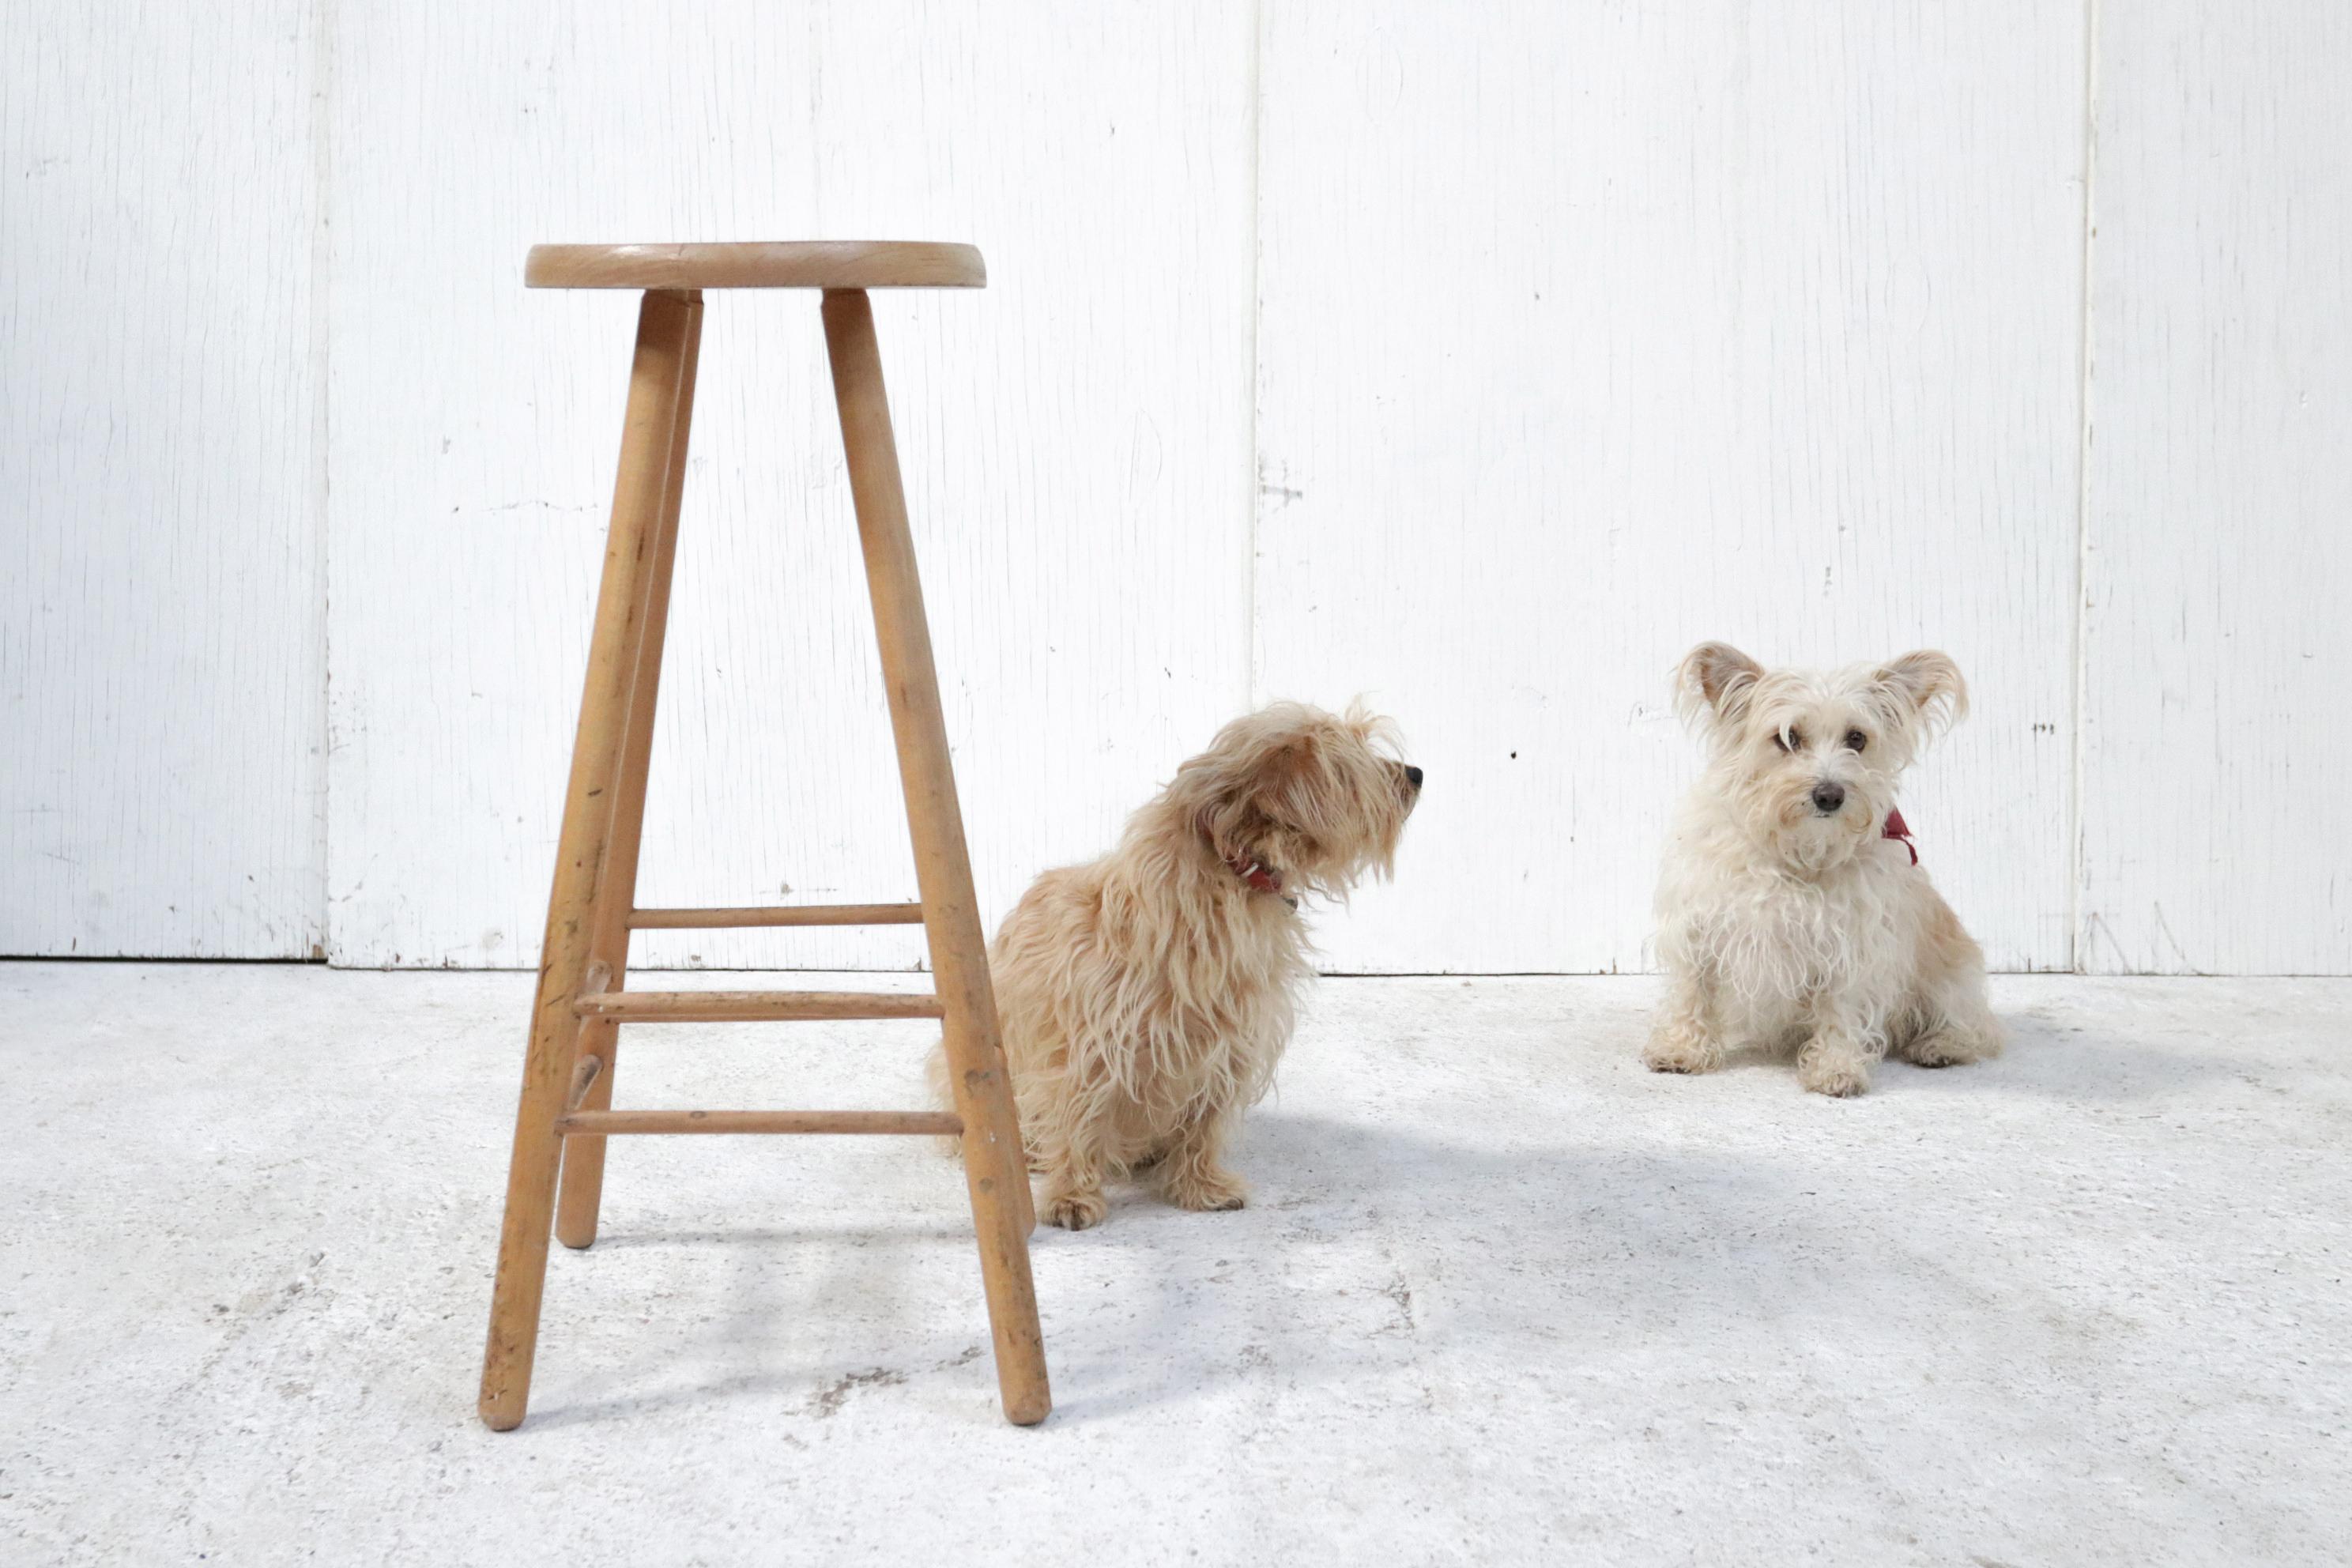 Very nice high stool made of beech wood.
Has a nice rough yet slim appearance.

Keywords, Durable, Raw, Wabi Sabi, Perfect imperfection, Wood, Nature, Blonde.